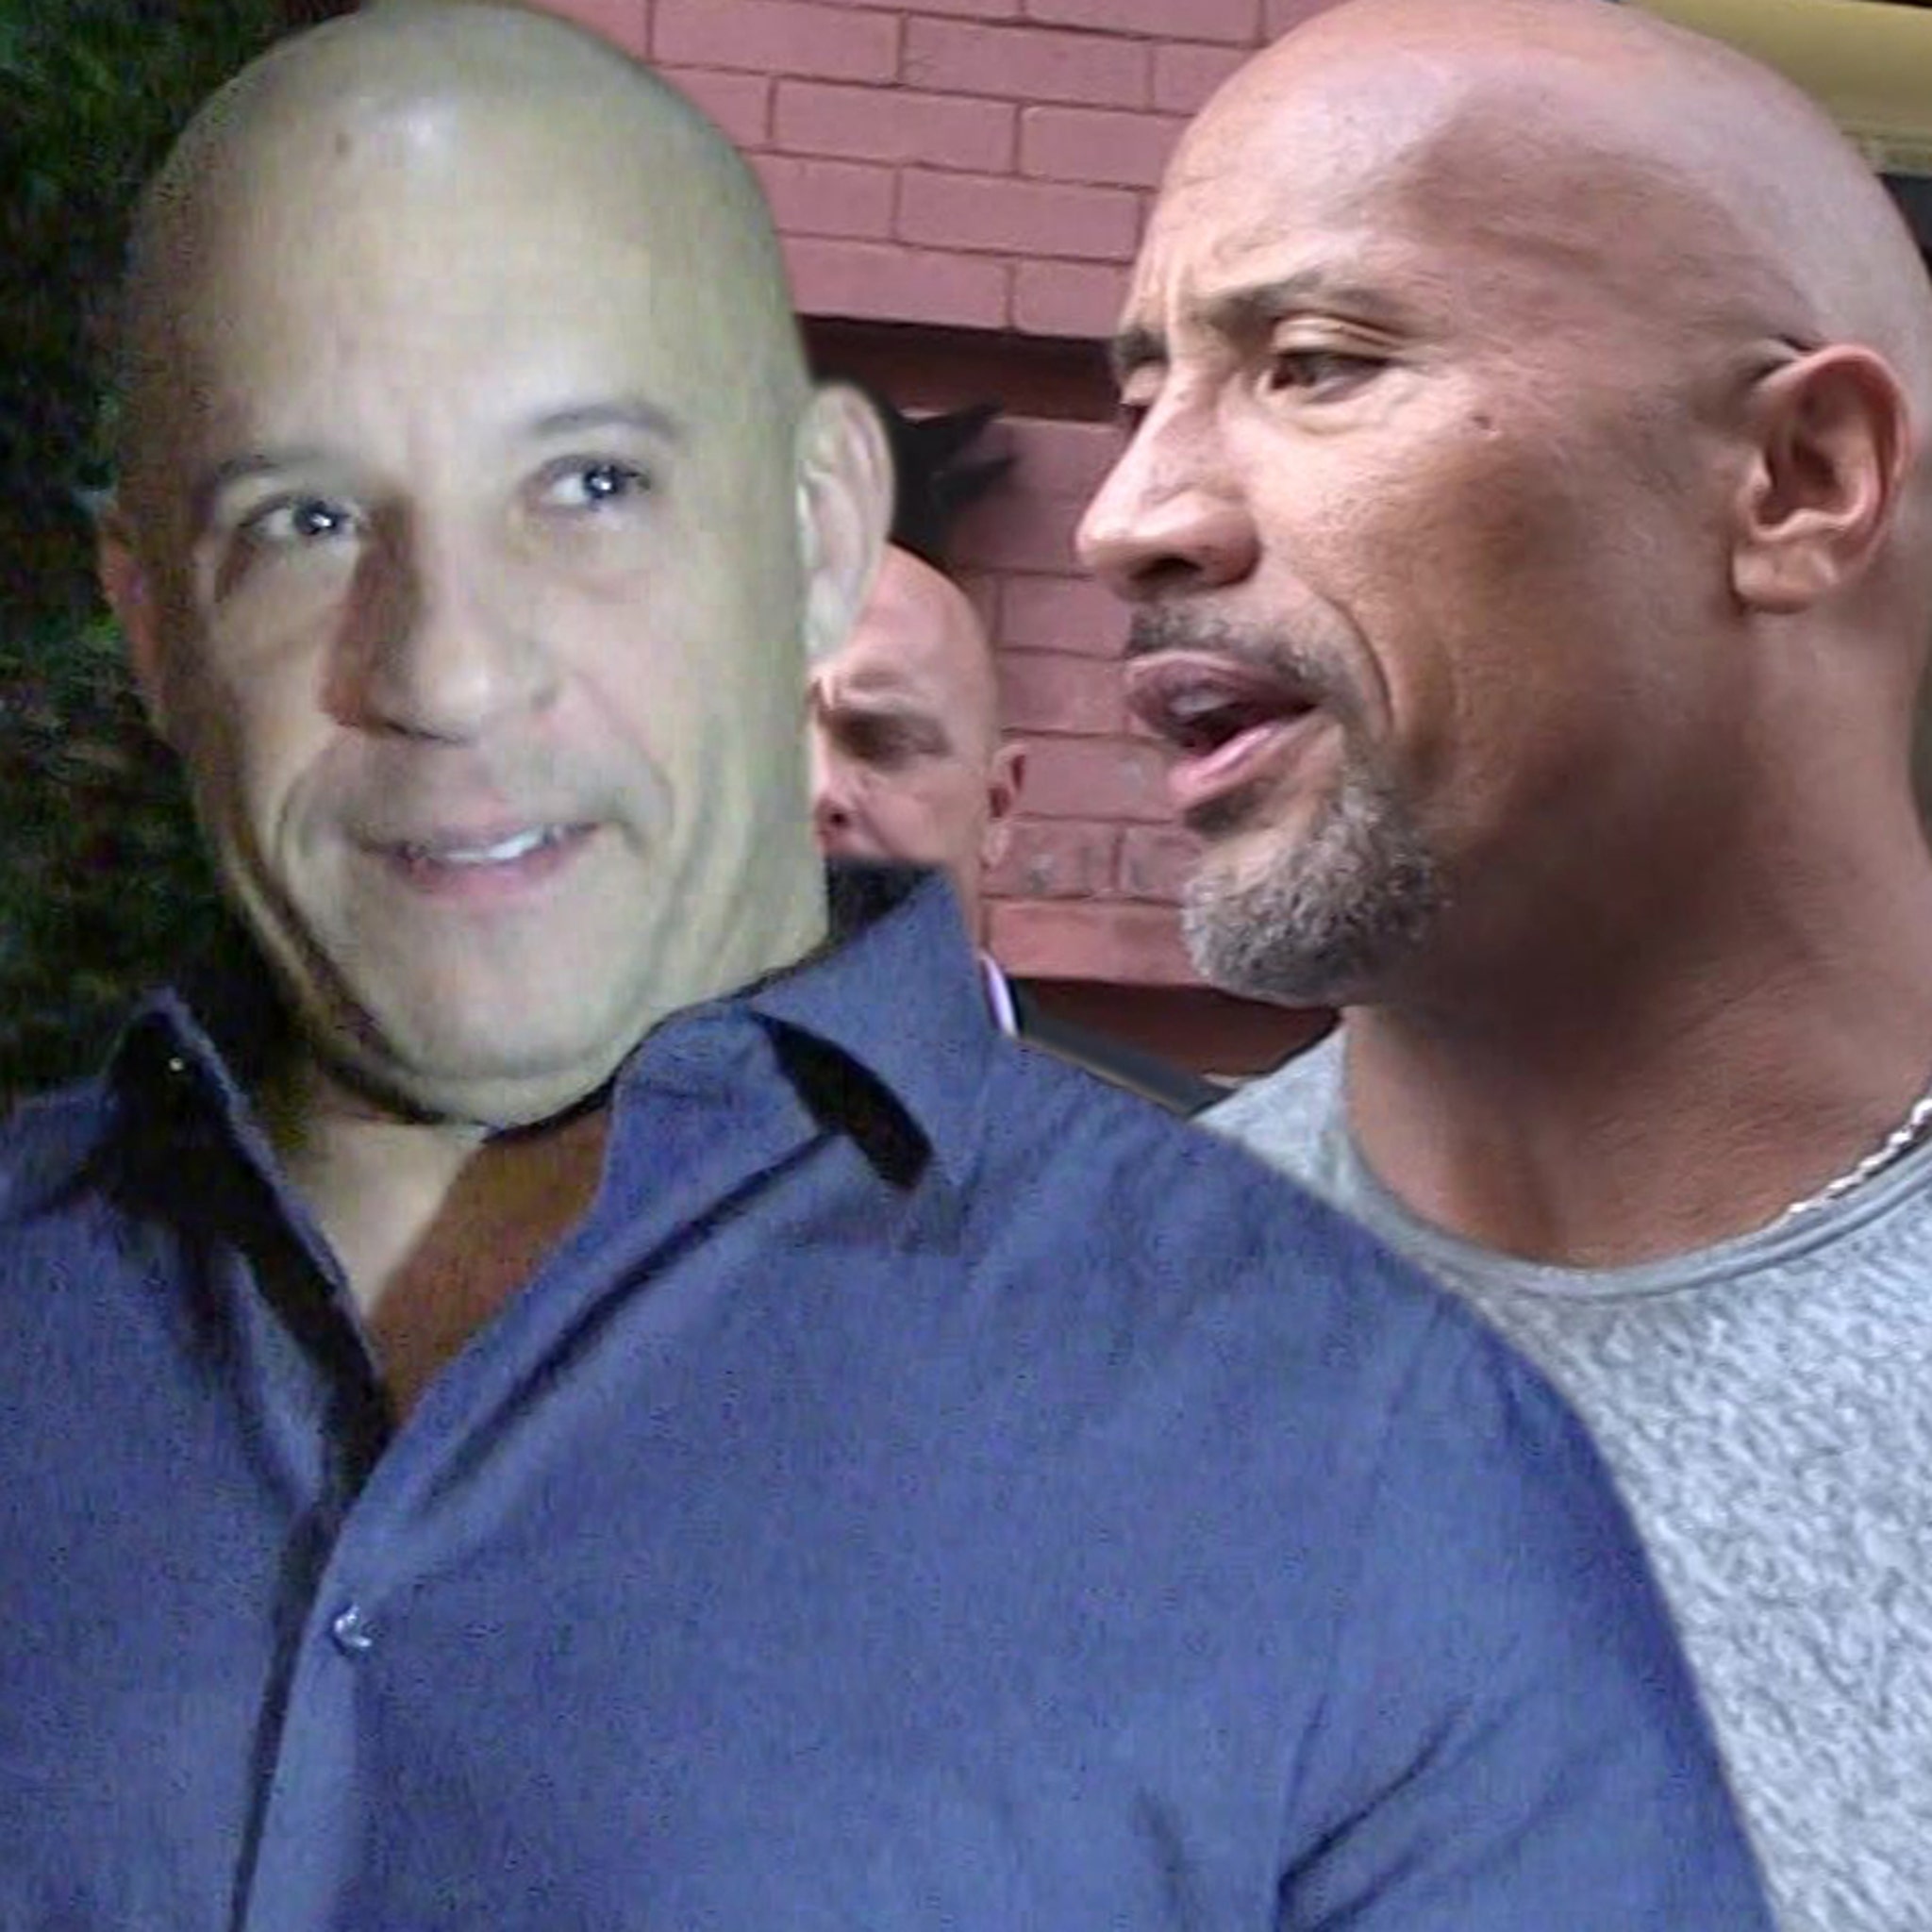 Vin Diesel Calls on The Rock to Help Finish 'Fast' Franchise